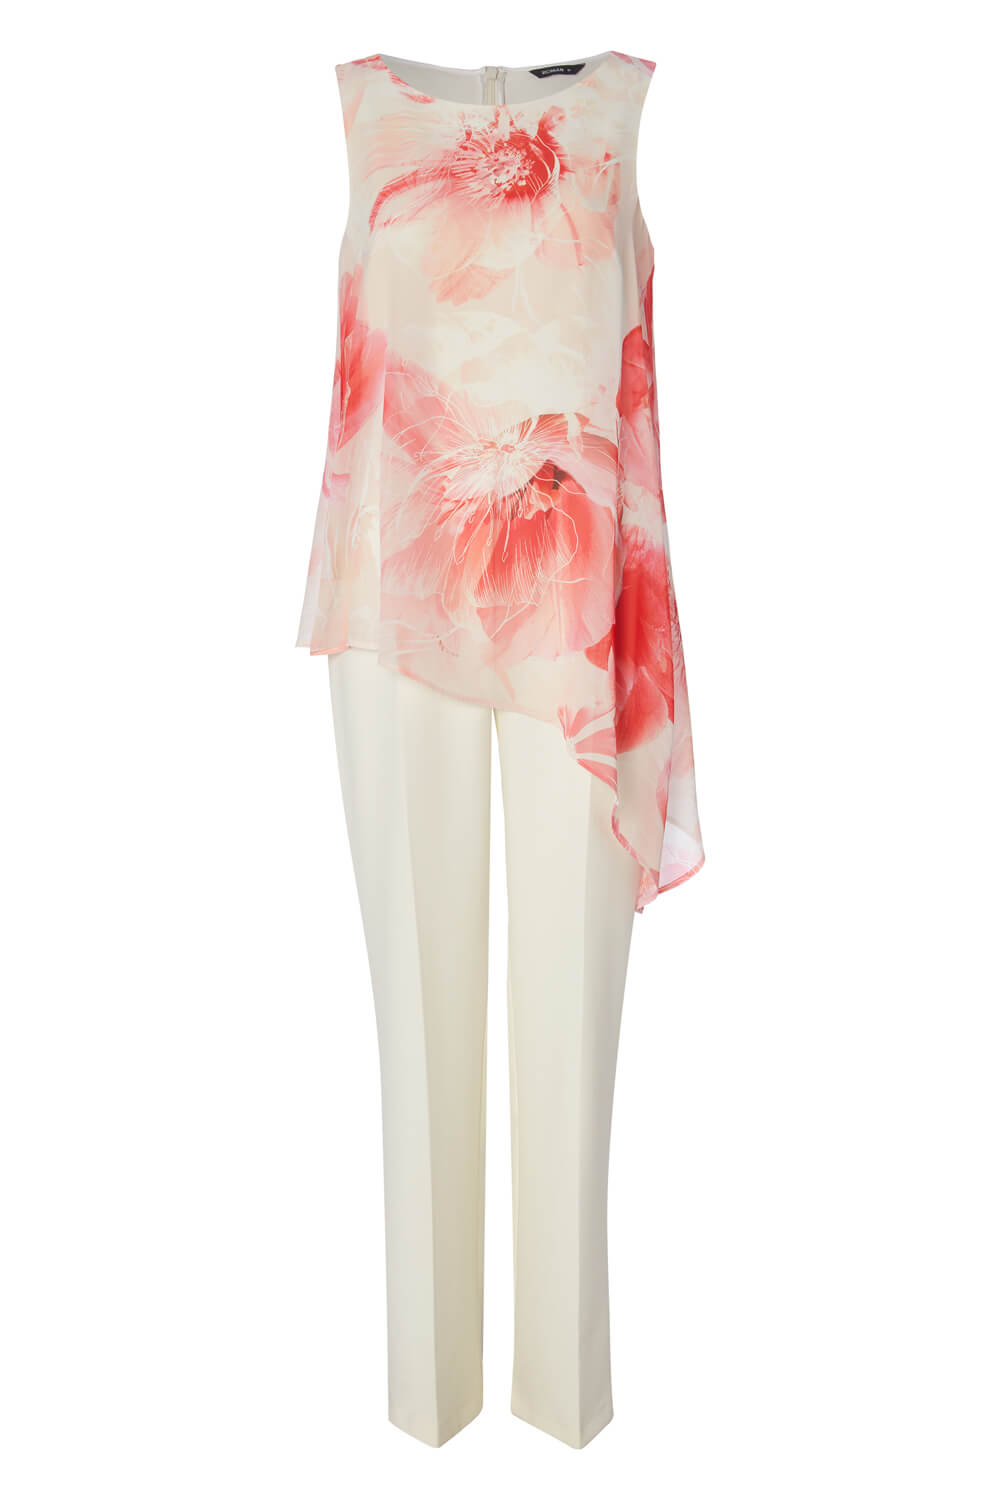 Ivory  Floral Chiffon Overlay Jumpsuit, Image 4 of 4